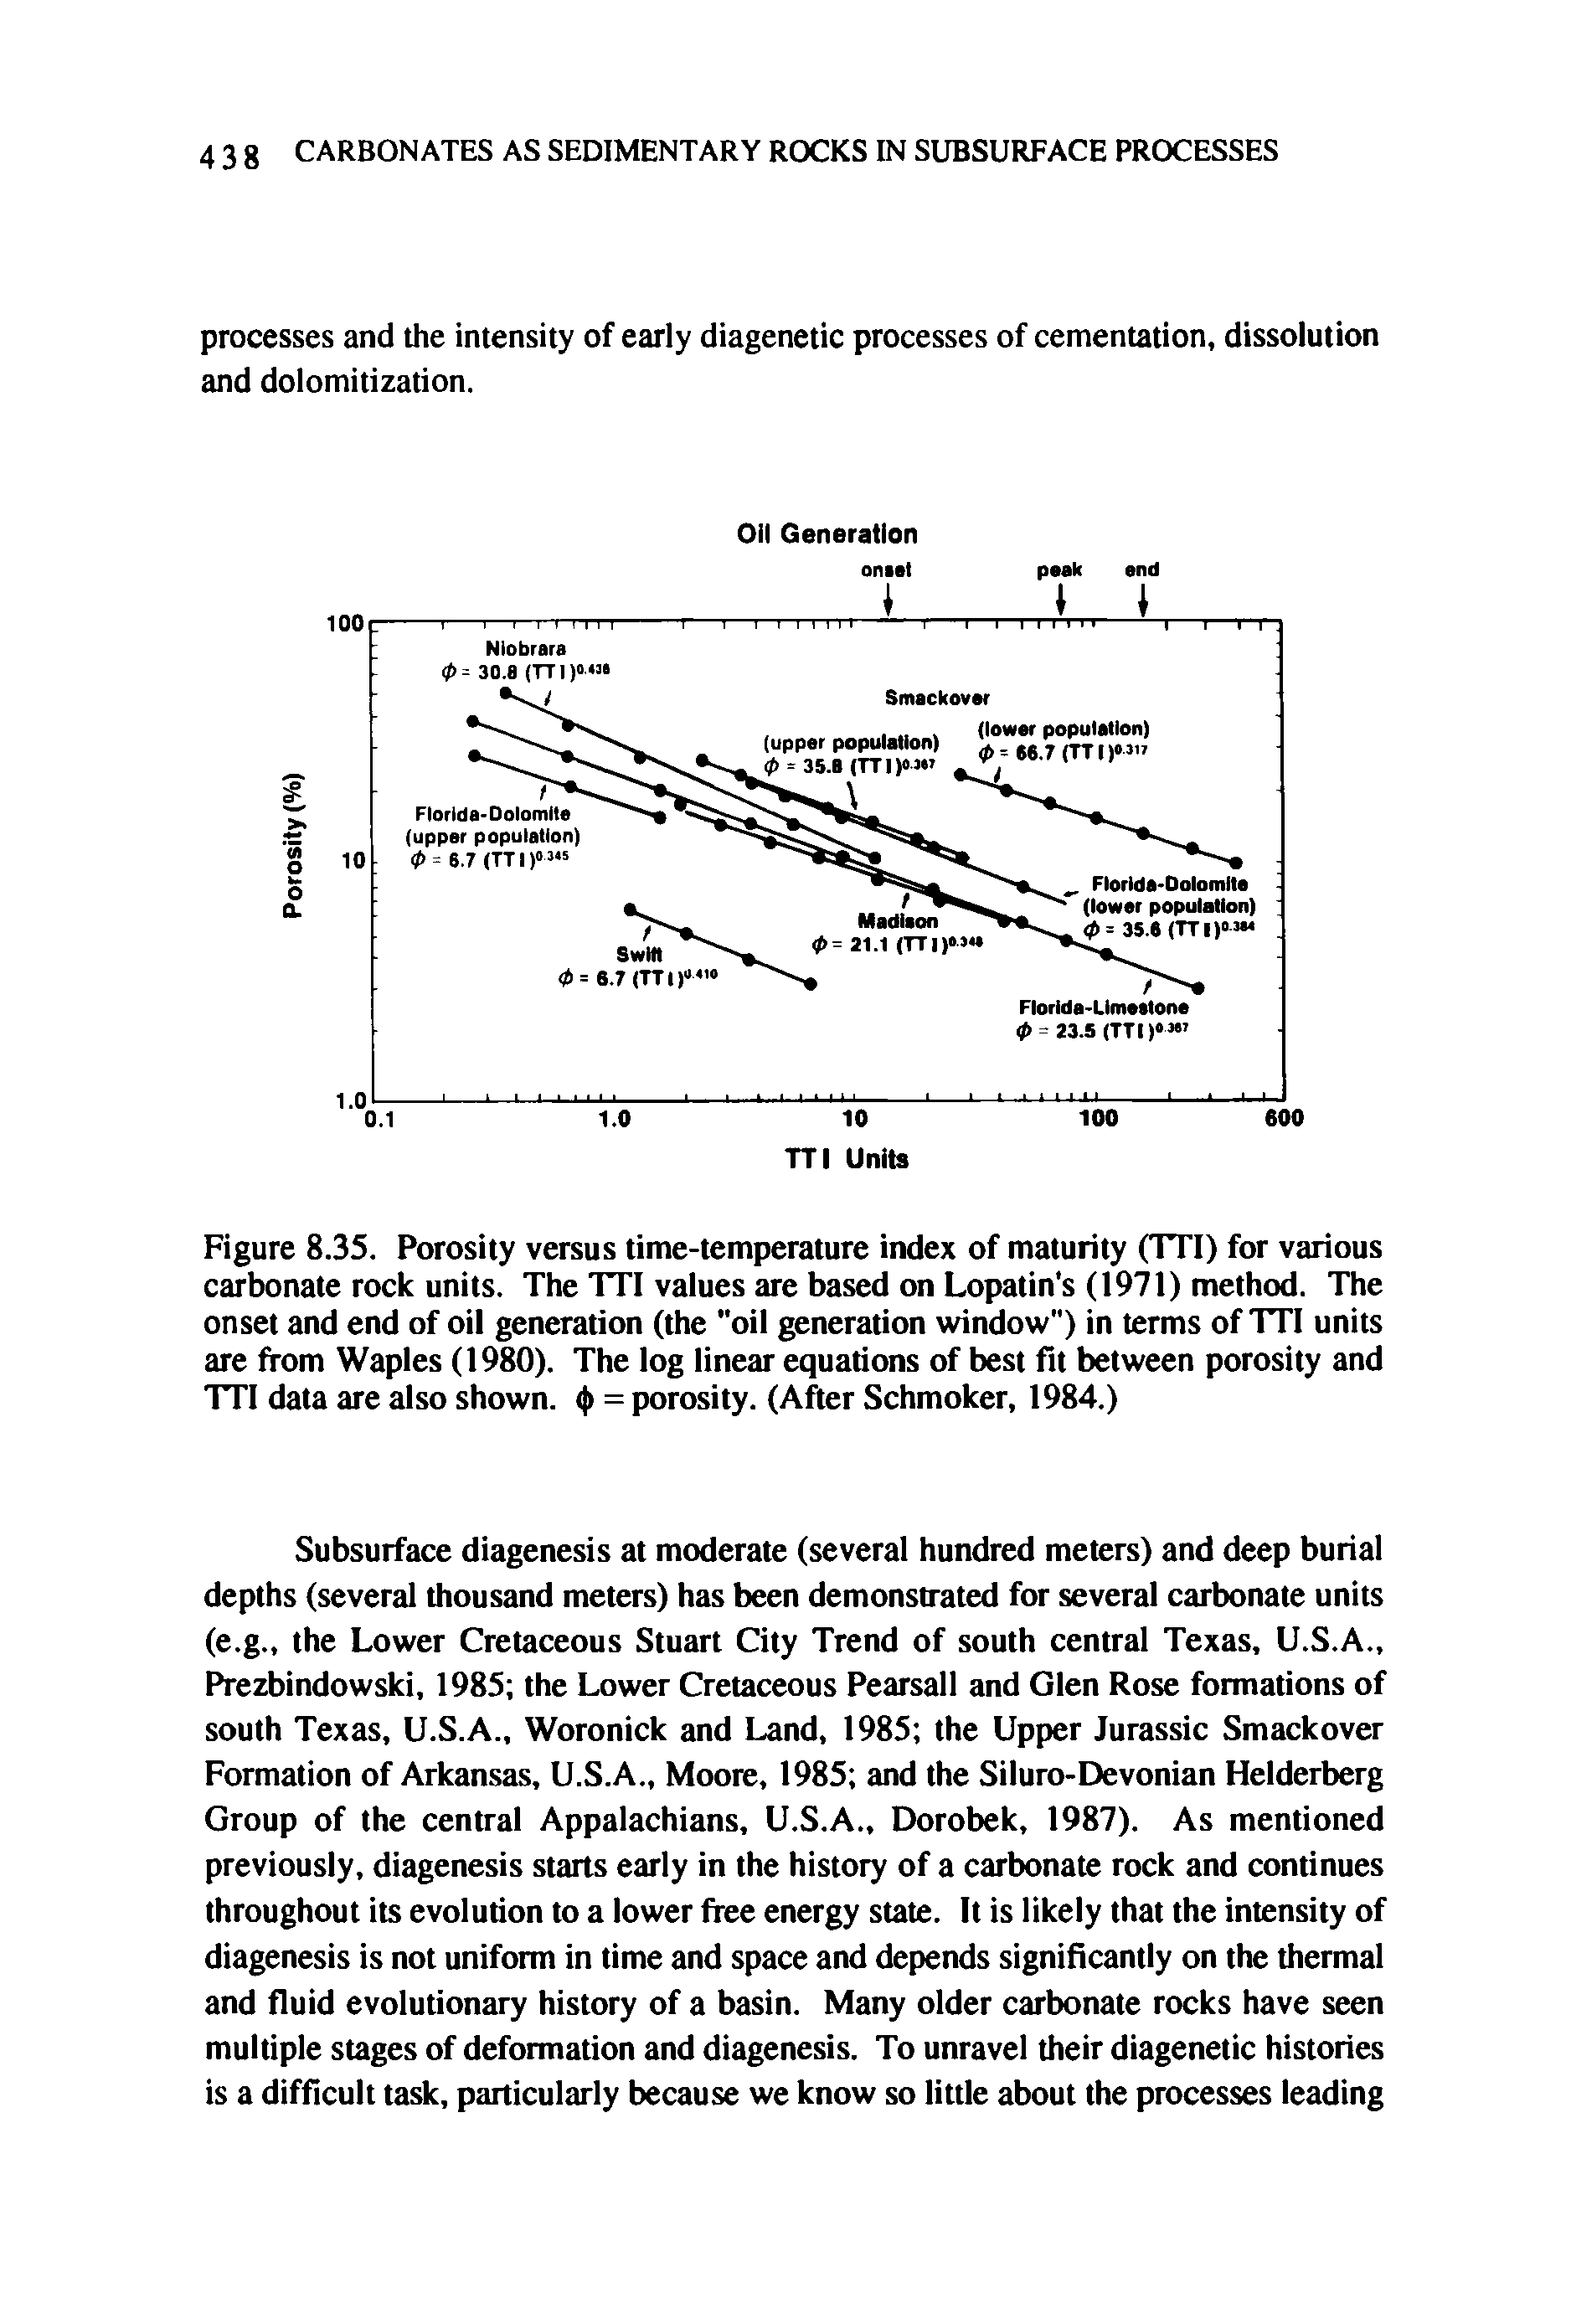 Figure 8.35. Porosity versus time-temperature index of maturity (TTI) for various carbonate rock units. The TTI values are based on Lopatin s (1971) method. The onset and end of oil generation (the "oil generation window") in terms of TTI units are from Waples (1980). The log linear equations of best fit between porosity and TTI data are also shown. <j> = porosity. (After Schmoker, 1984.)...